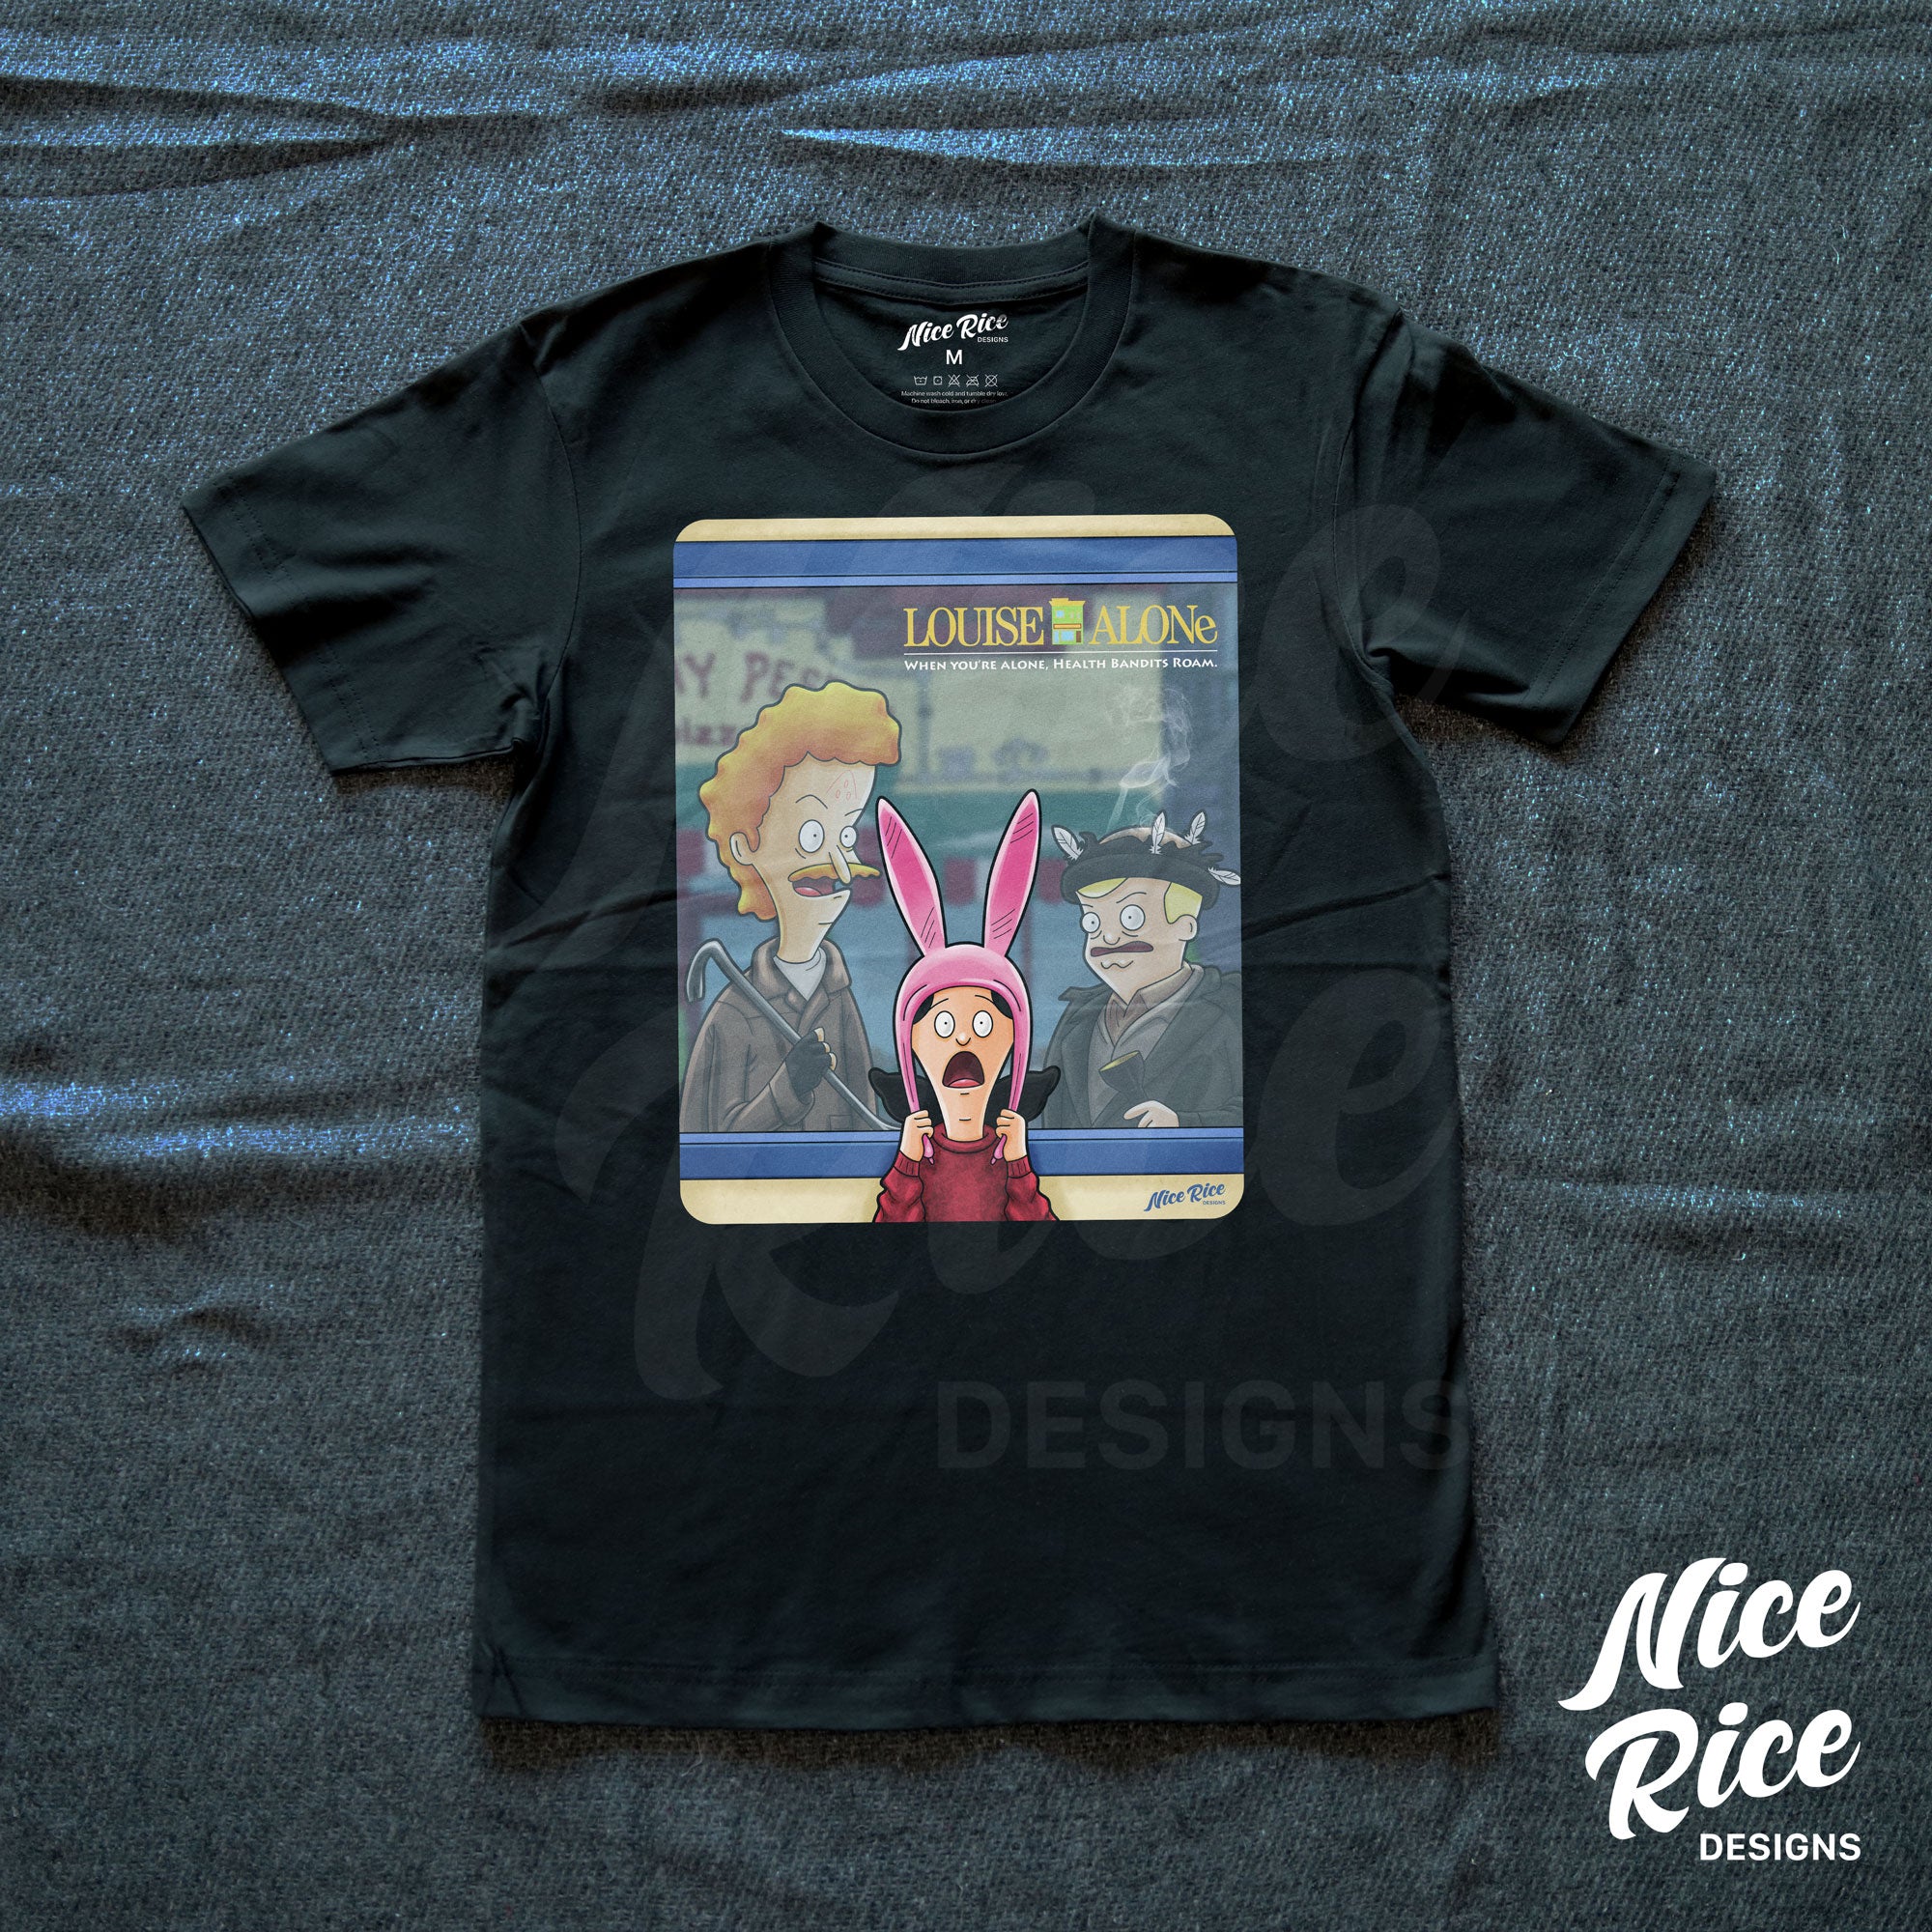 Louise Alone Shirt by Nice Rice Designs